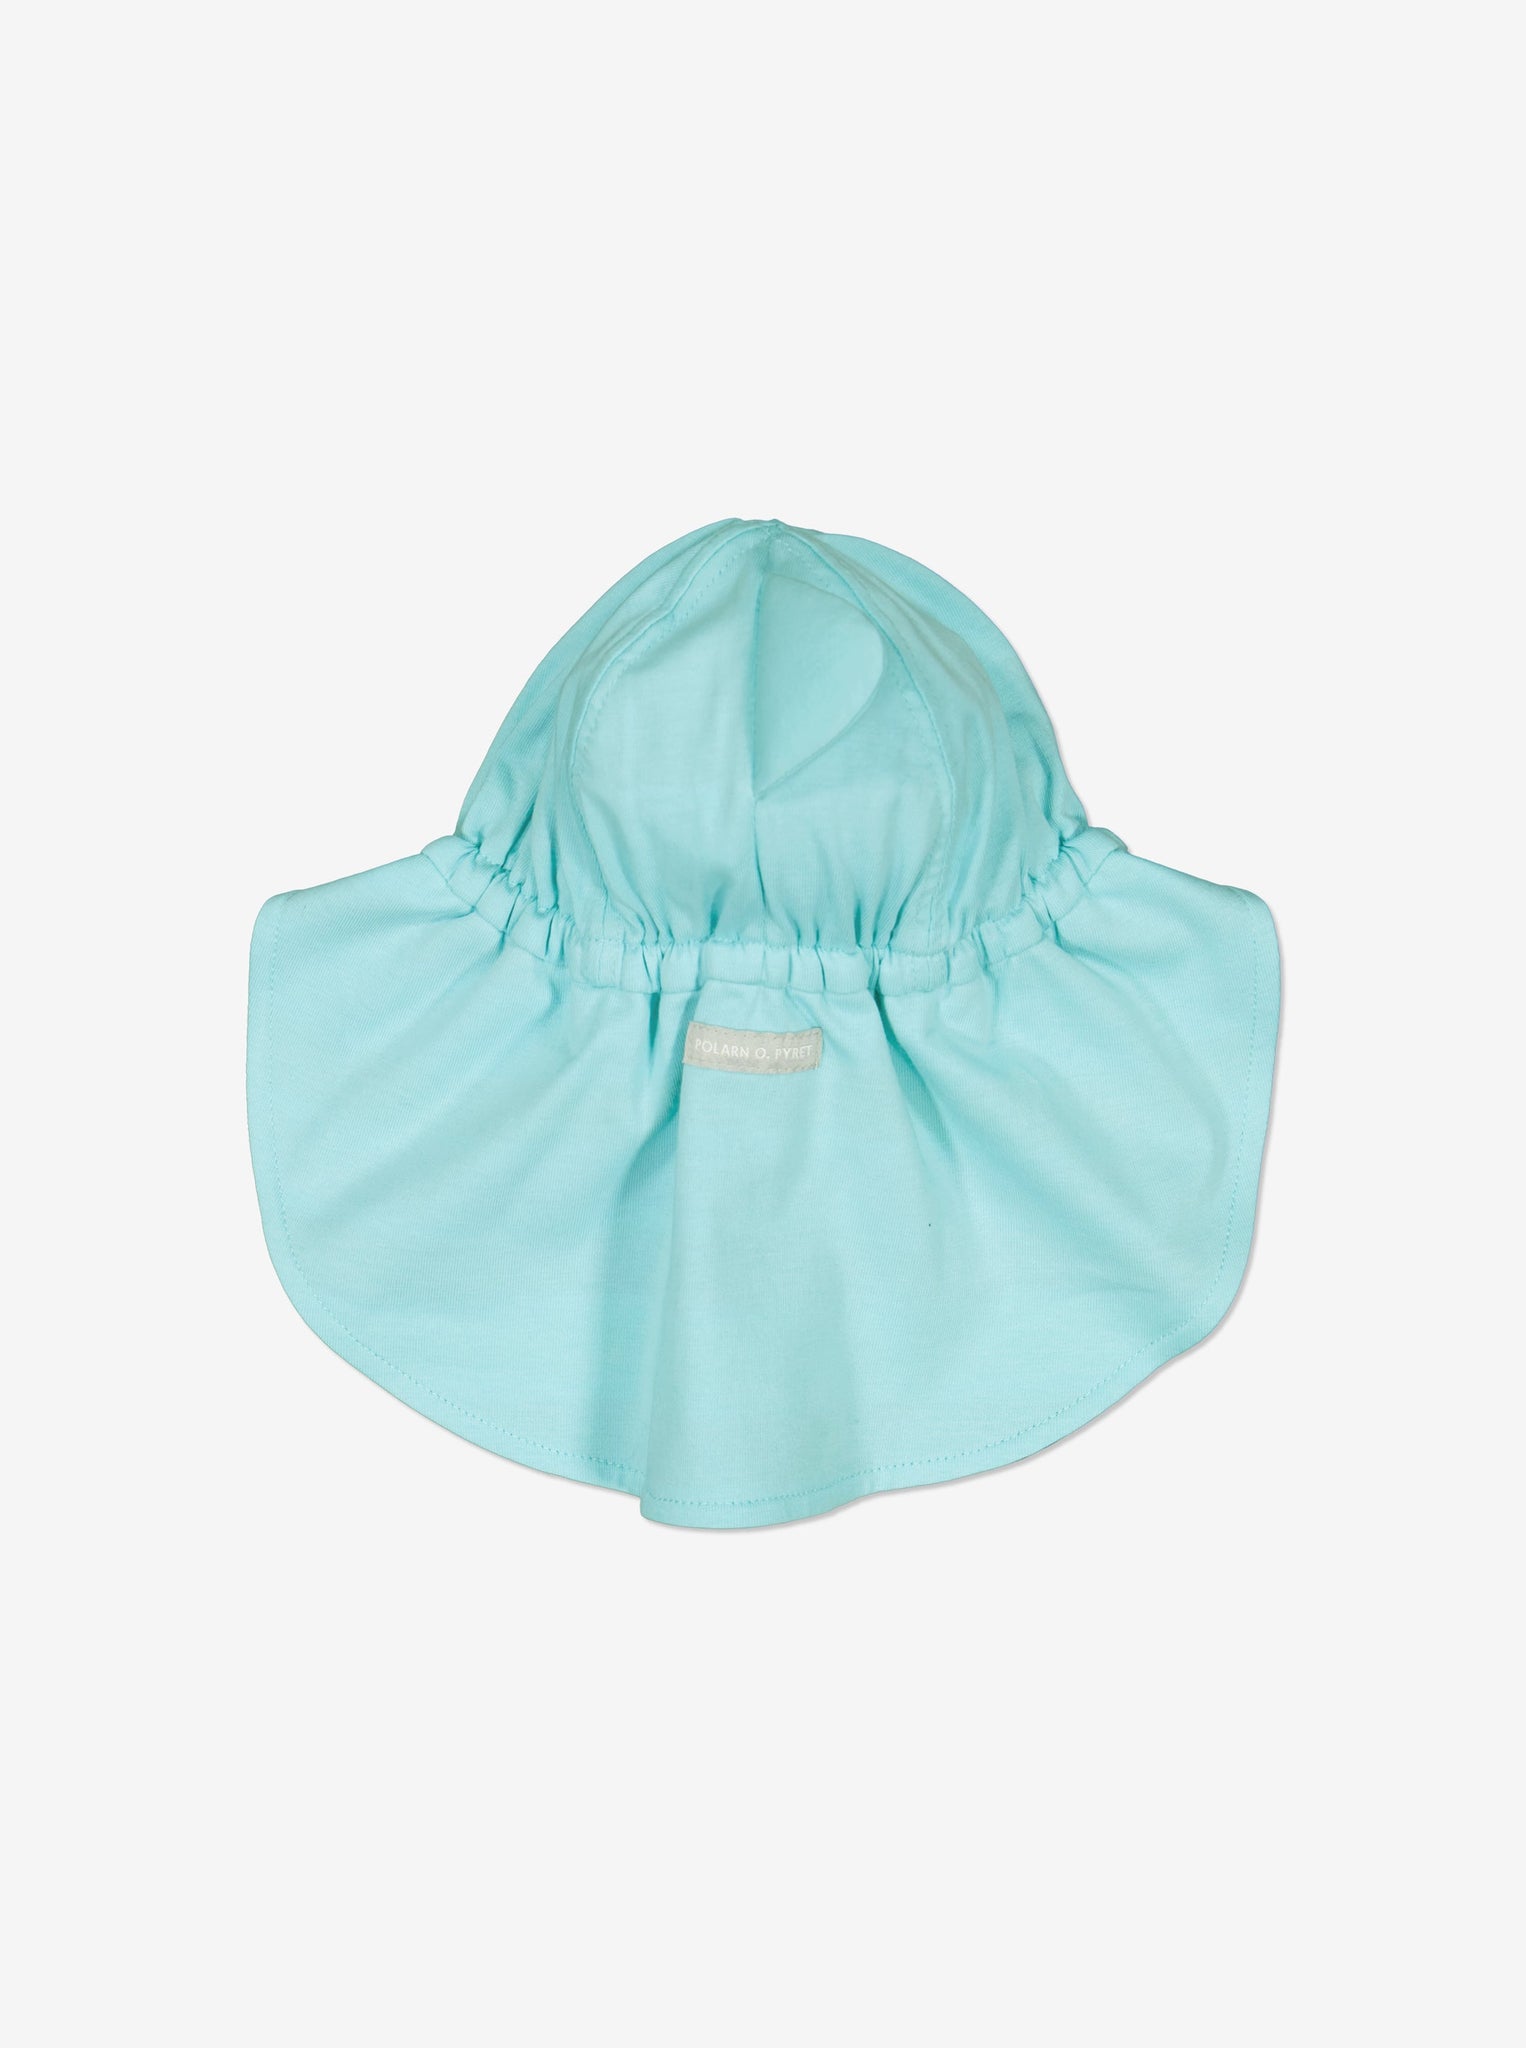 Dolphin Print Baby Sun Hat from Polarn O. Pyret Kidswear. Ethically made and sustainably sourced materials.